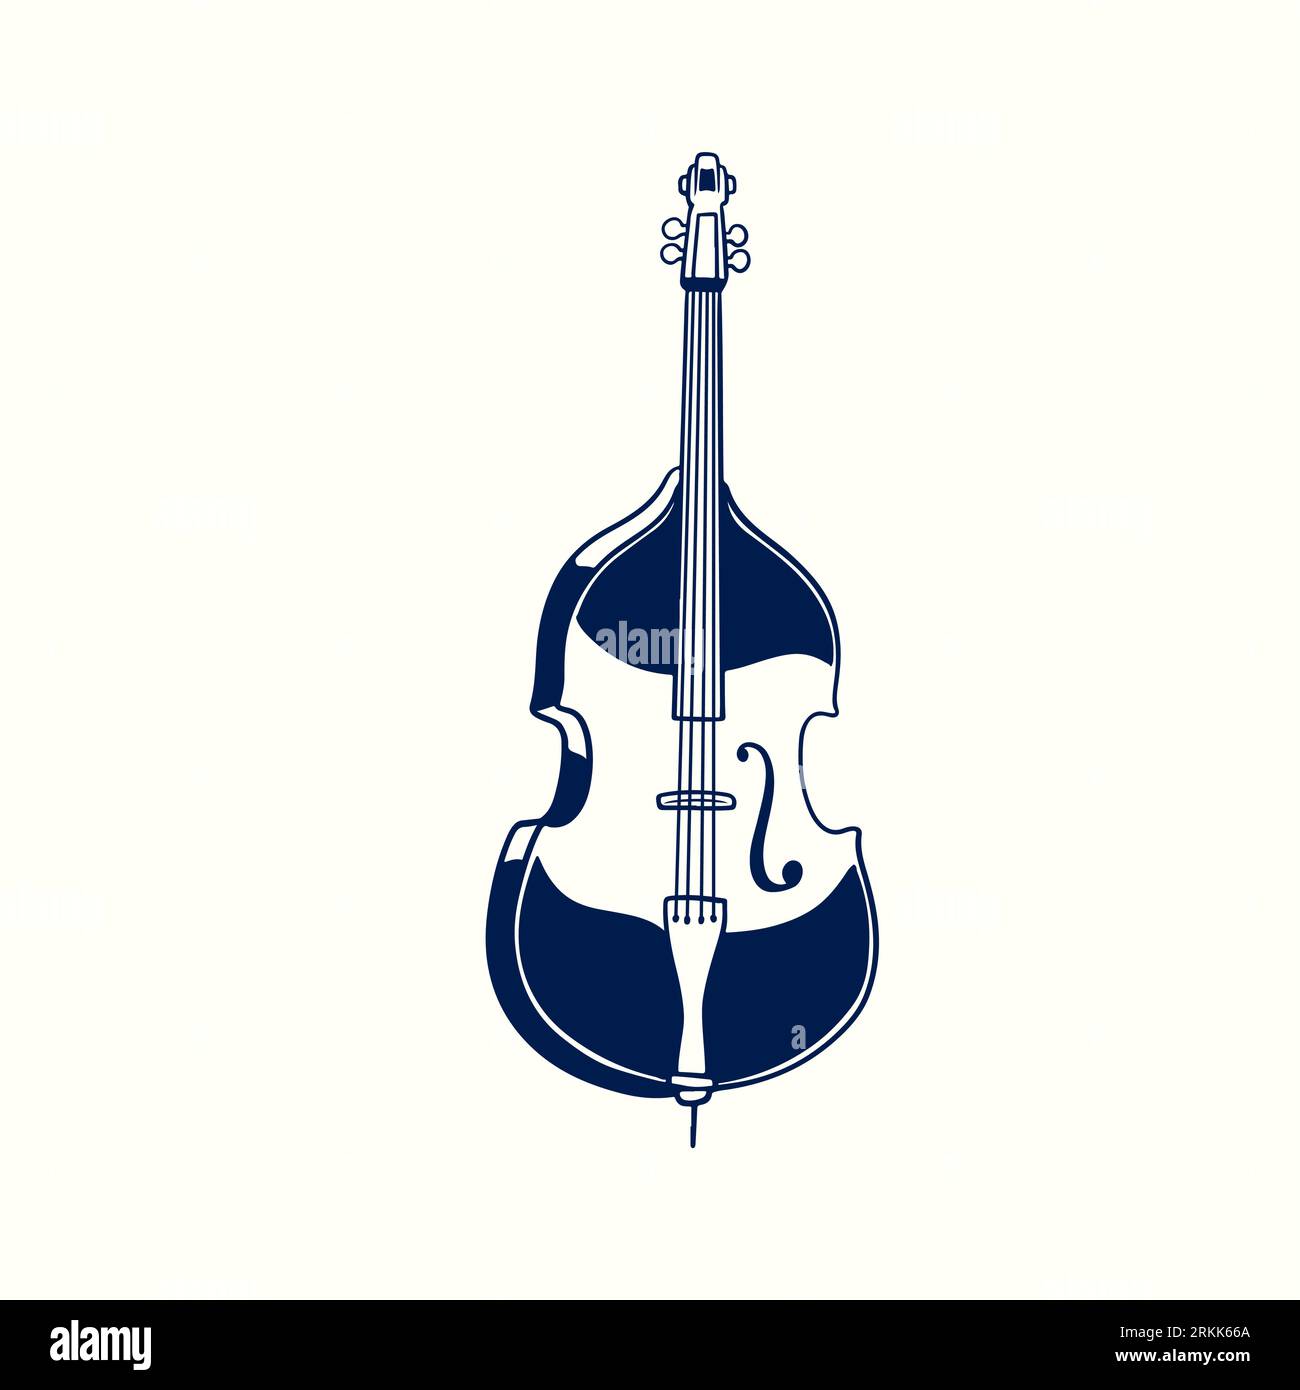 Double bass hand drawn vintage sketch style. Classical jazz music instrument isolated on white background. Old retro engraving bowed string instrument Stock Vector